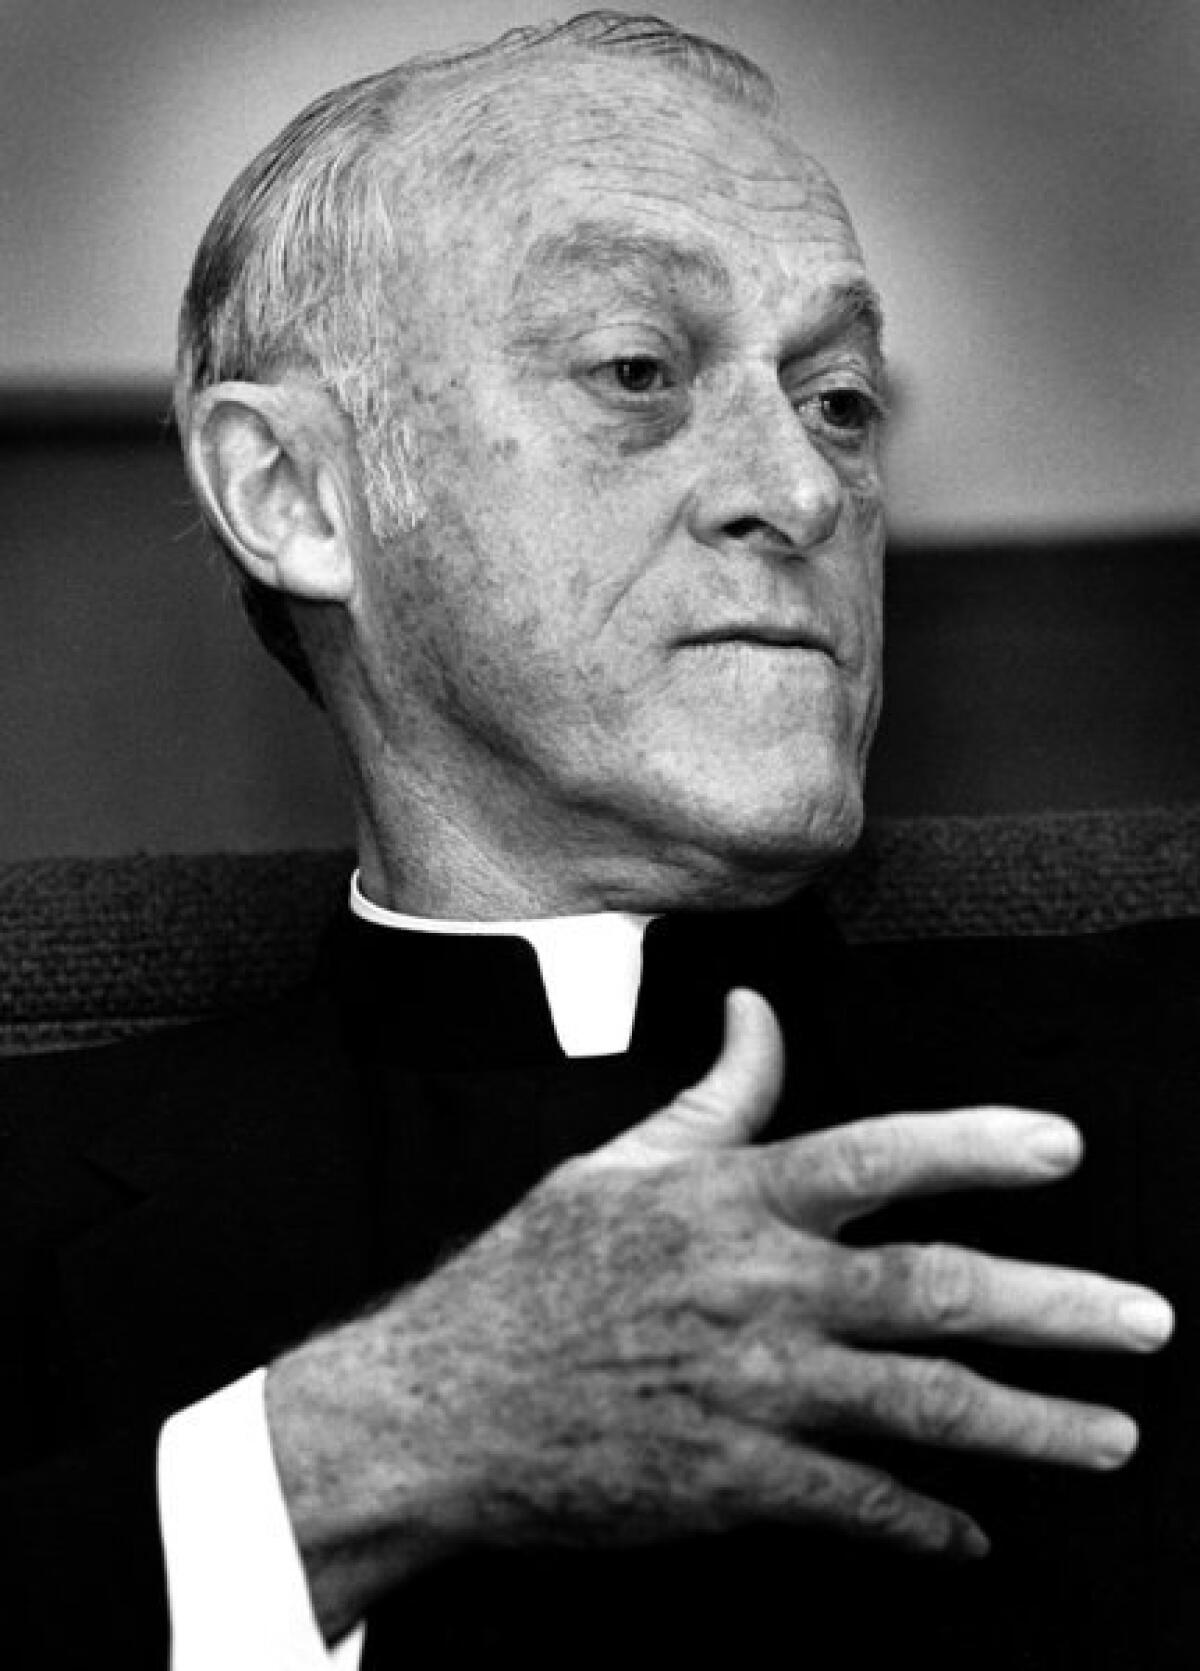 Msgr. Benjamin Hawkes in 1982. He died in 1985, shortly after the new archbishop, Roger Mahony, stripped him of the power to carry out financial transactions over $100,000.